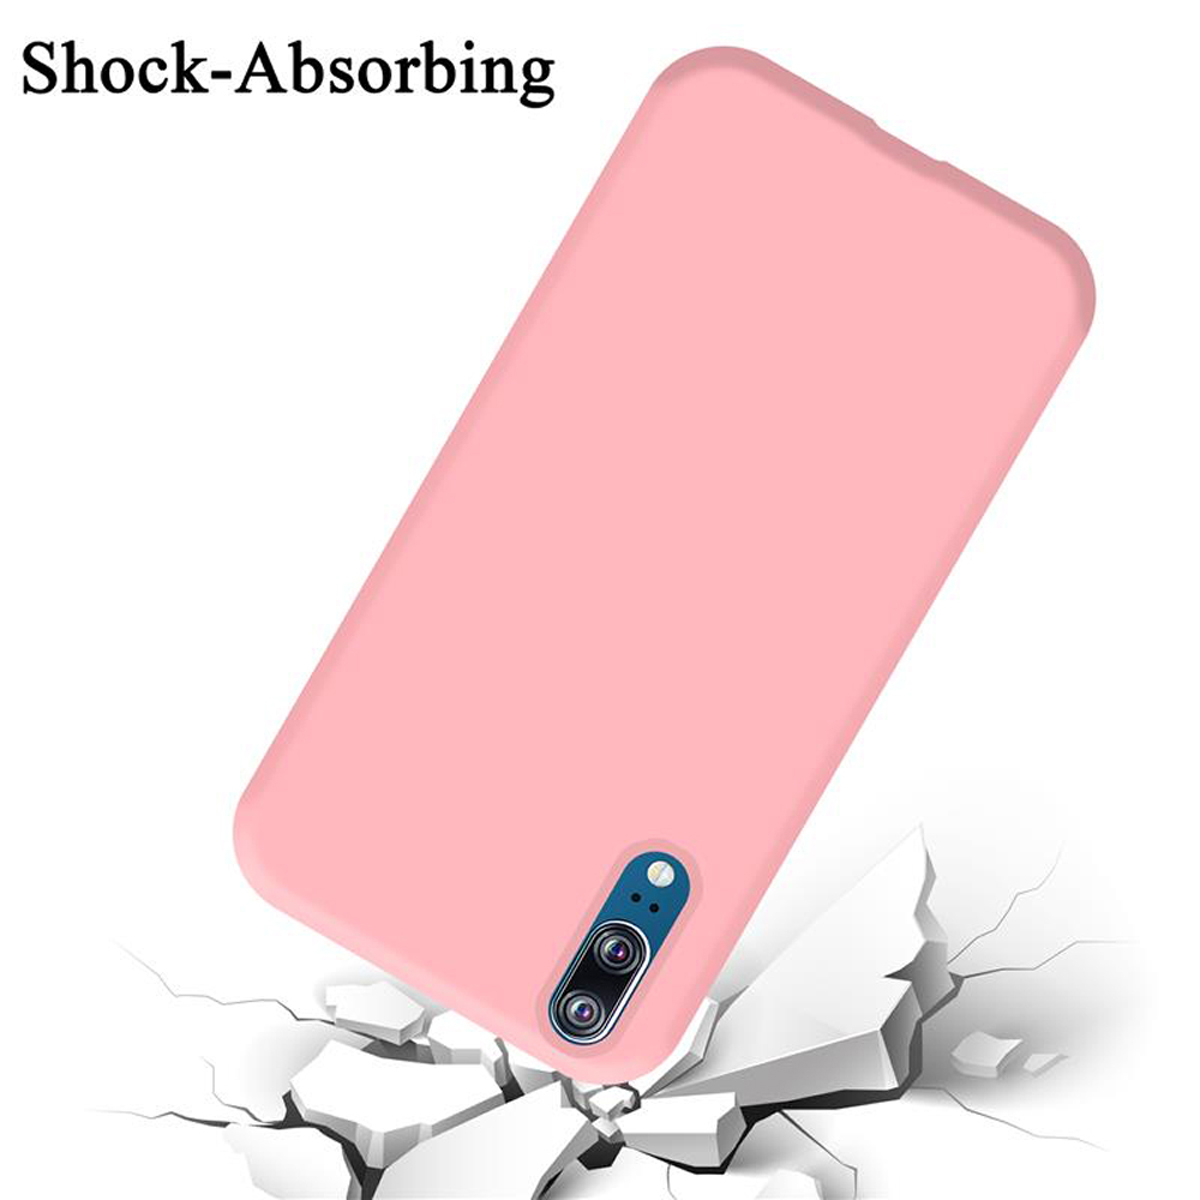 P20, CADORABO Style, Backcover, Silicone Case im PINK LIQUID Hülle Liquid Huawei,